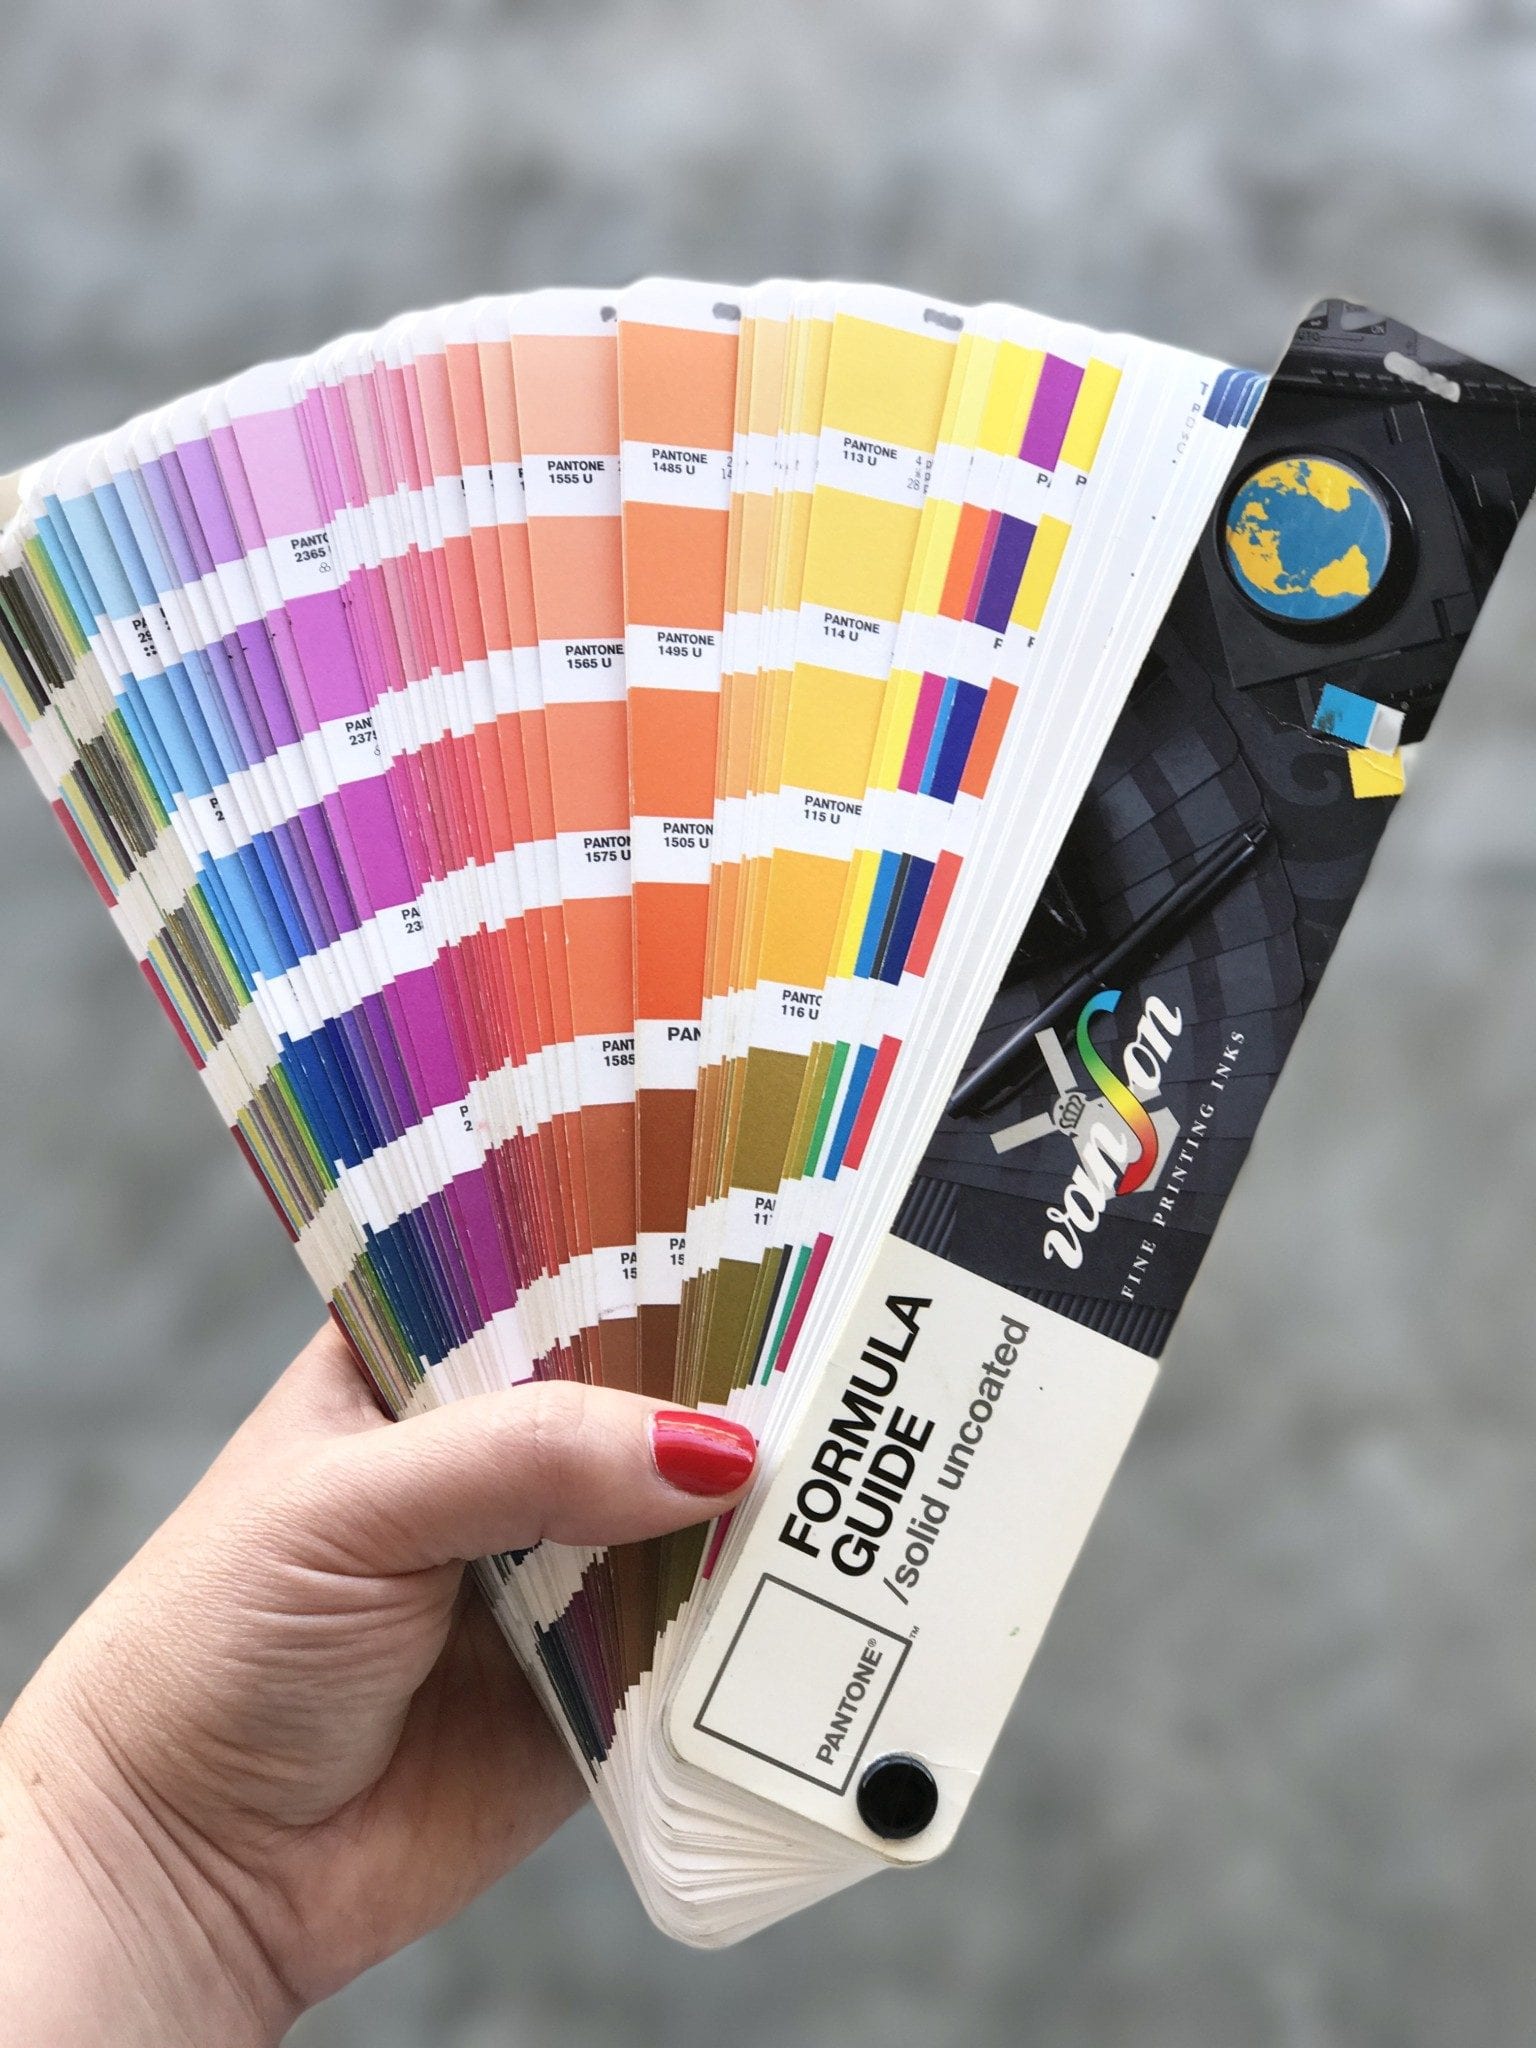 Paper Pantone Guide fanned out to show many color swatches.